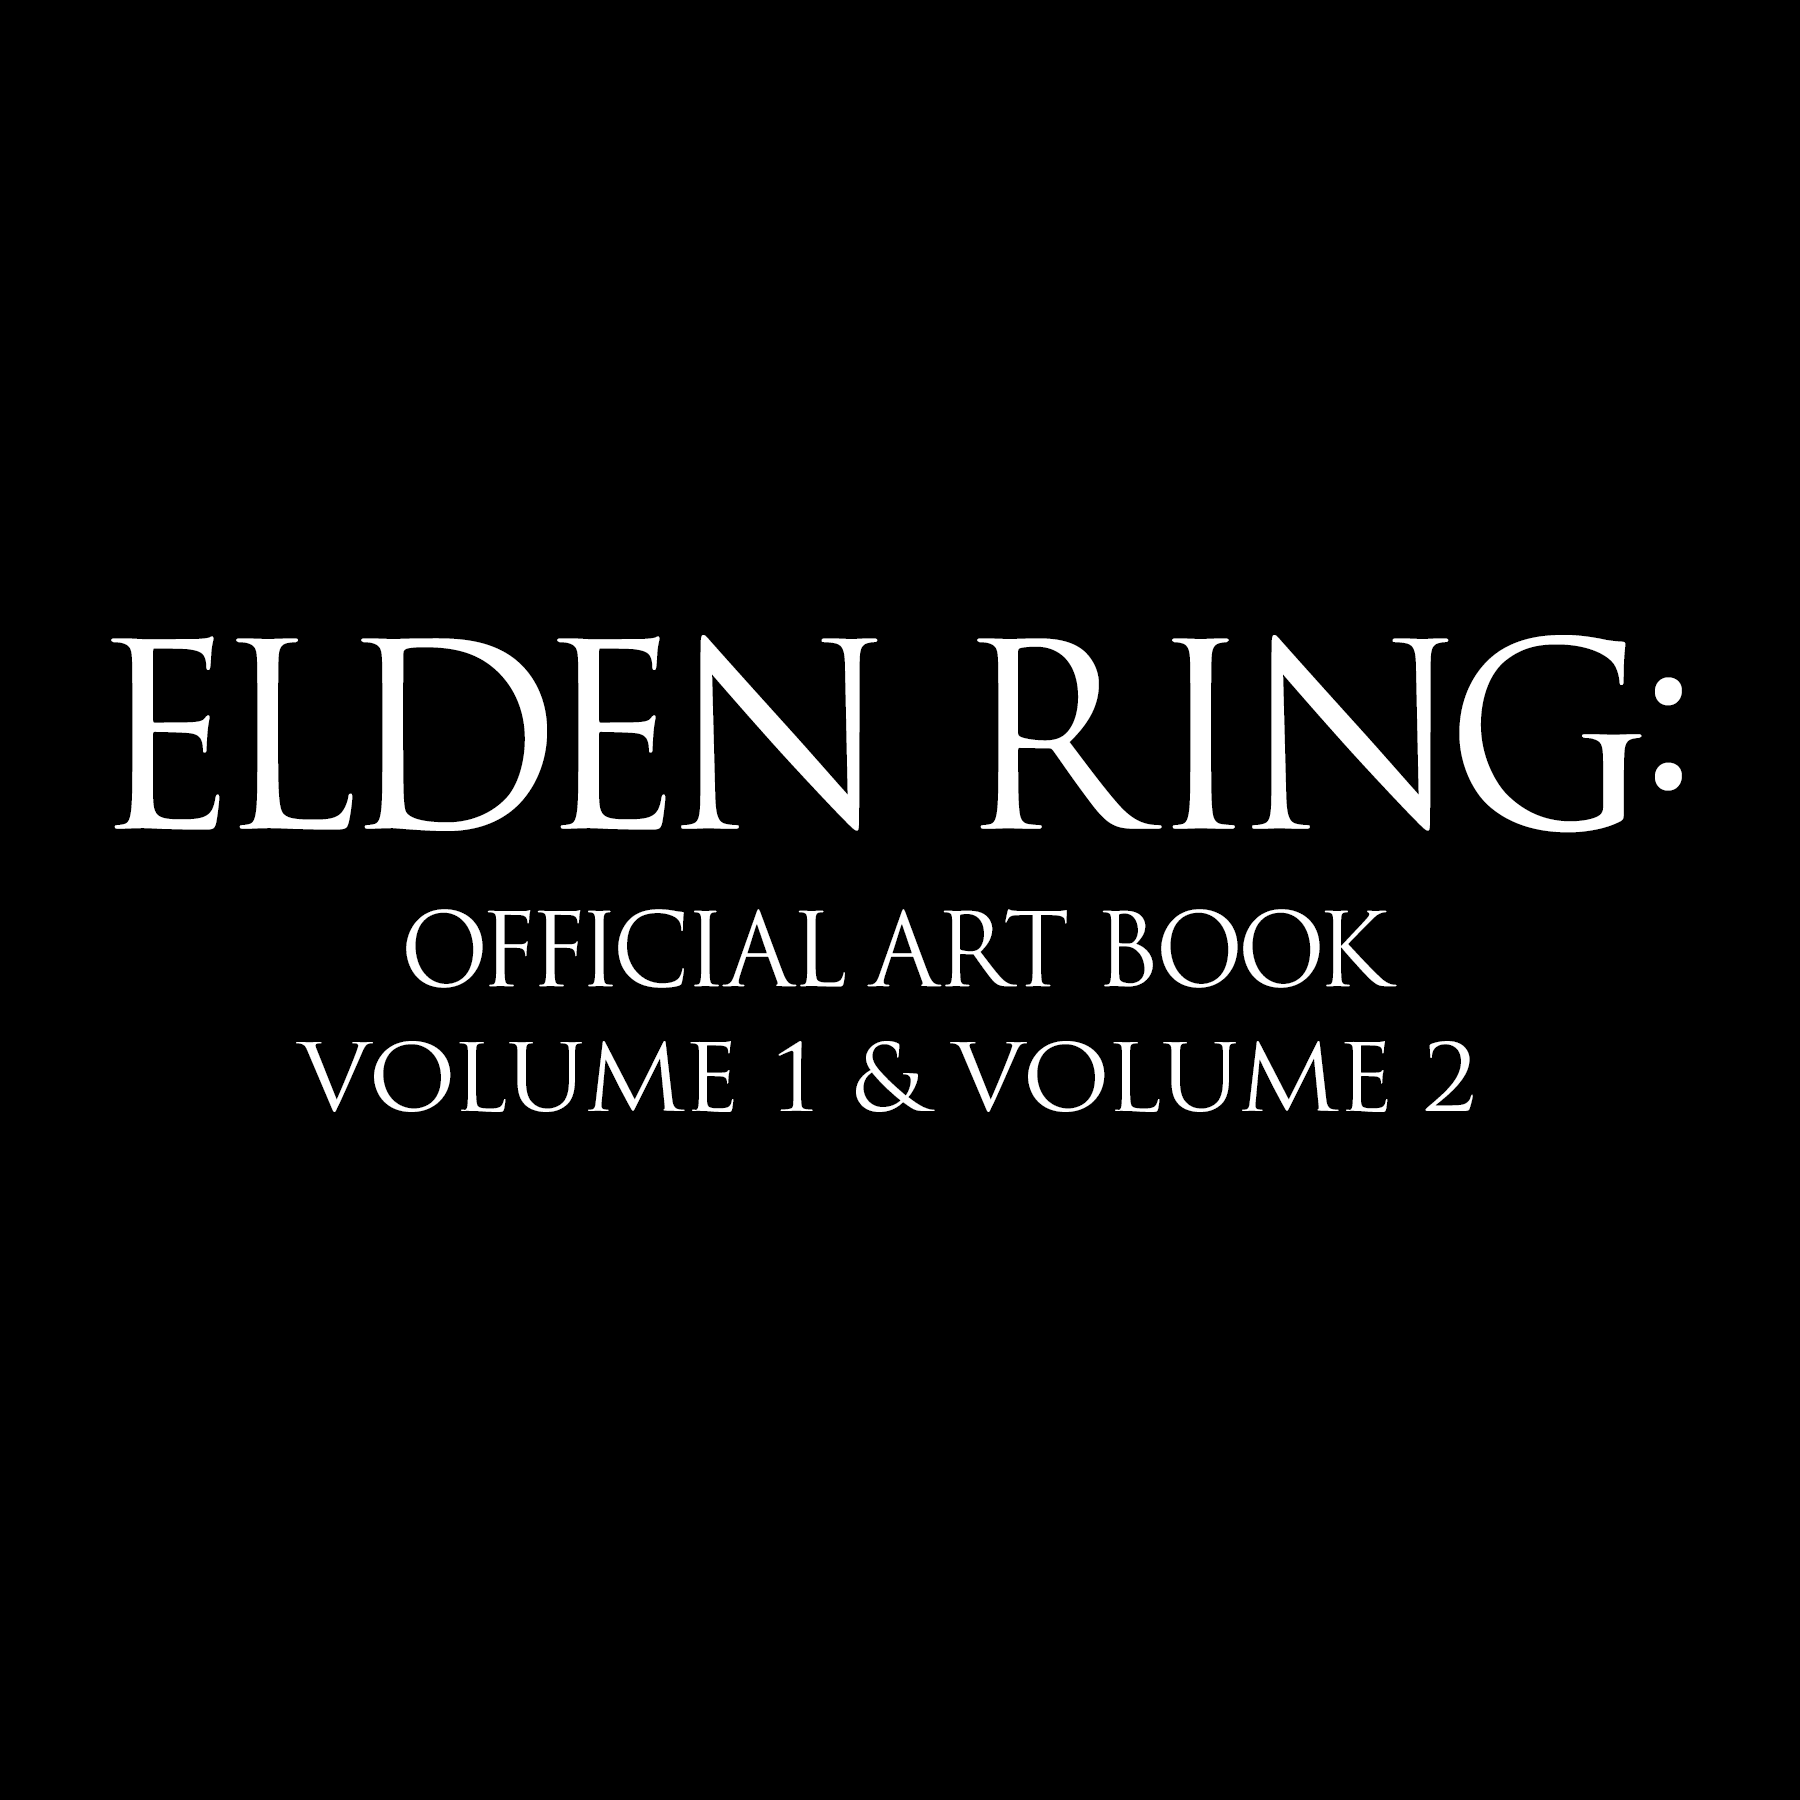 UDON Announces Elden Ring: Official Art Book Volumes 1 & 2 Hardcovers –  UDON Entertainment